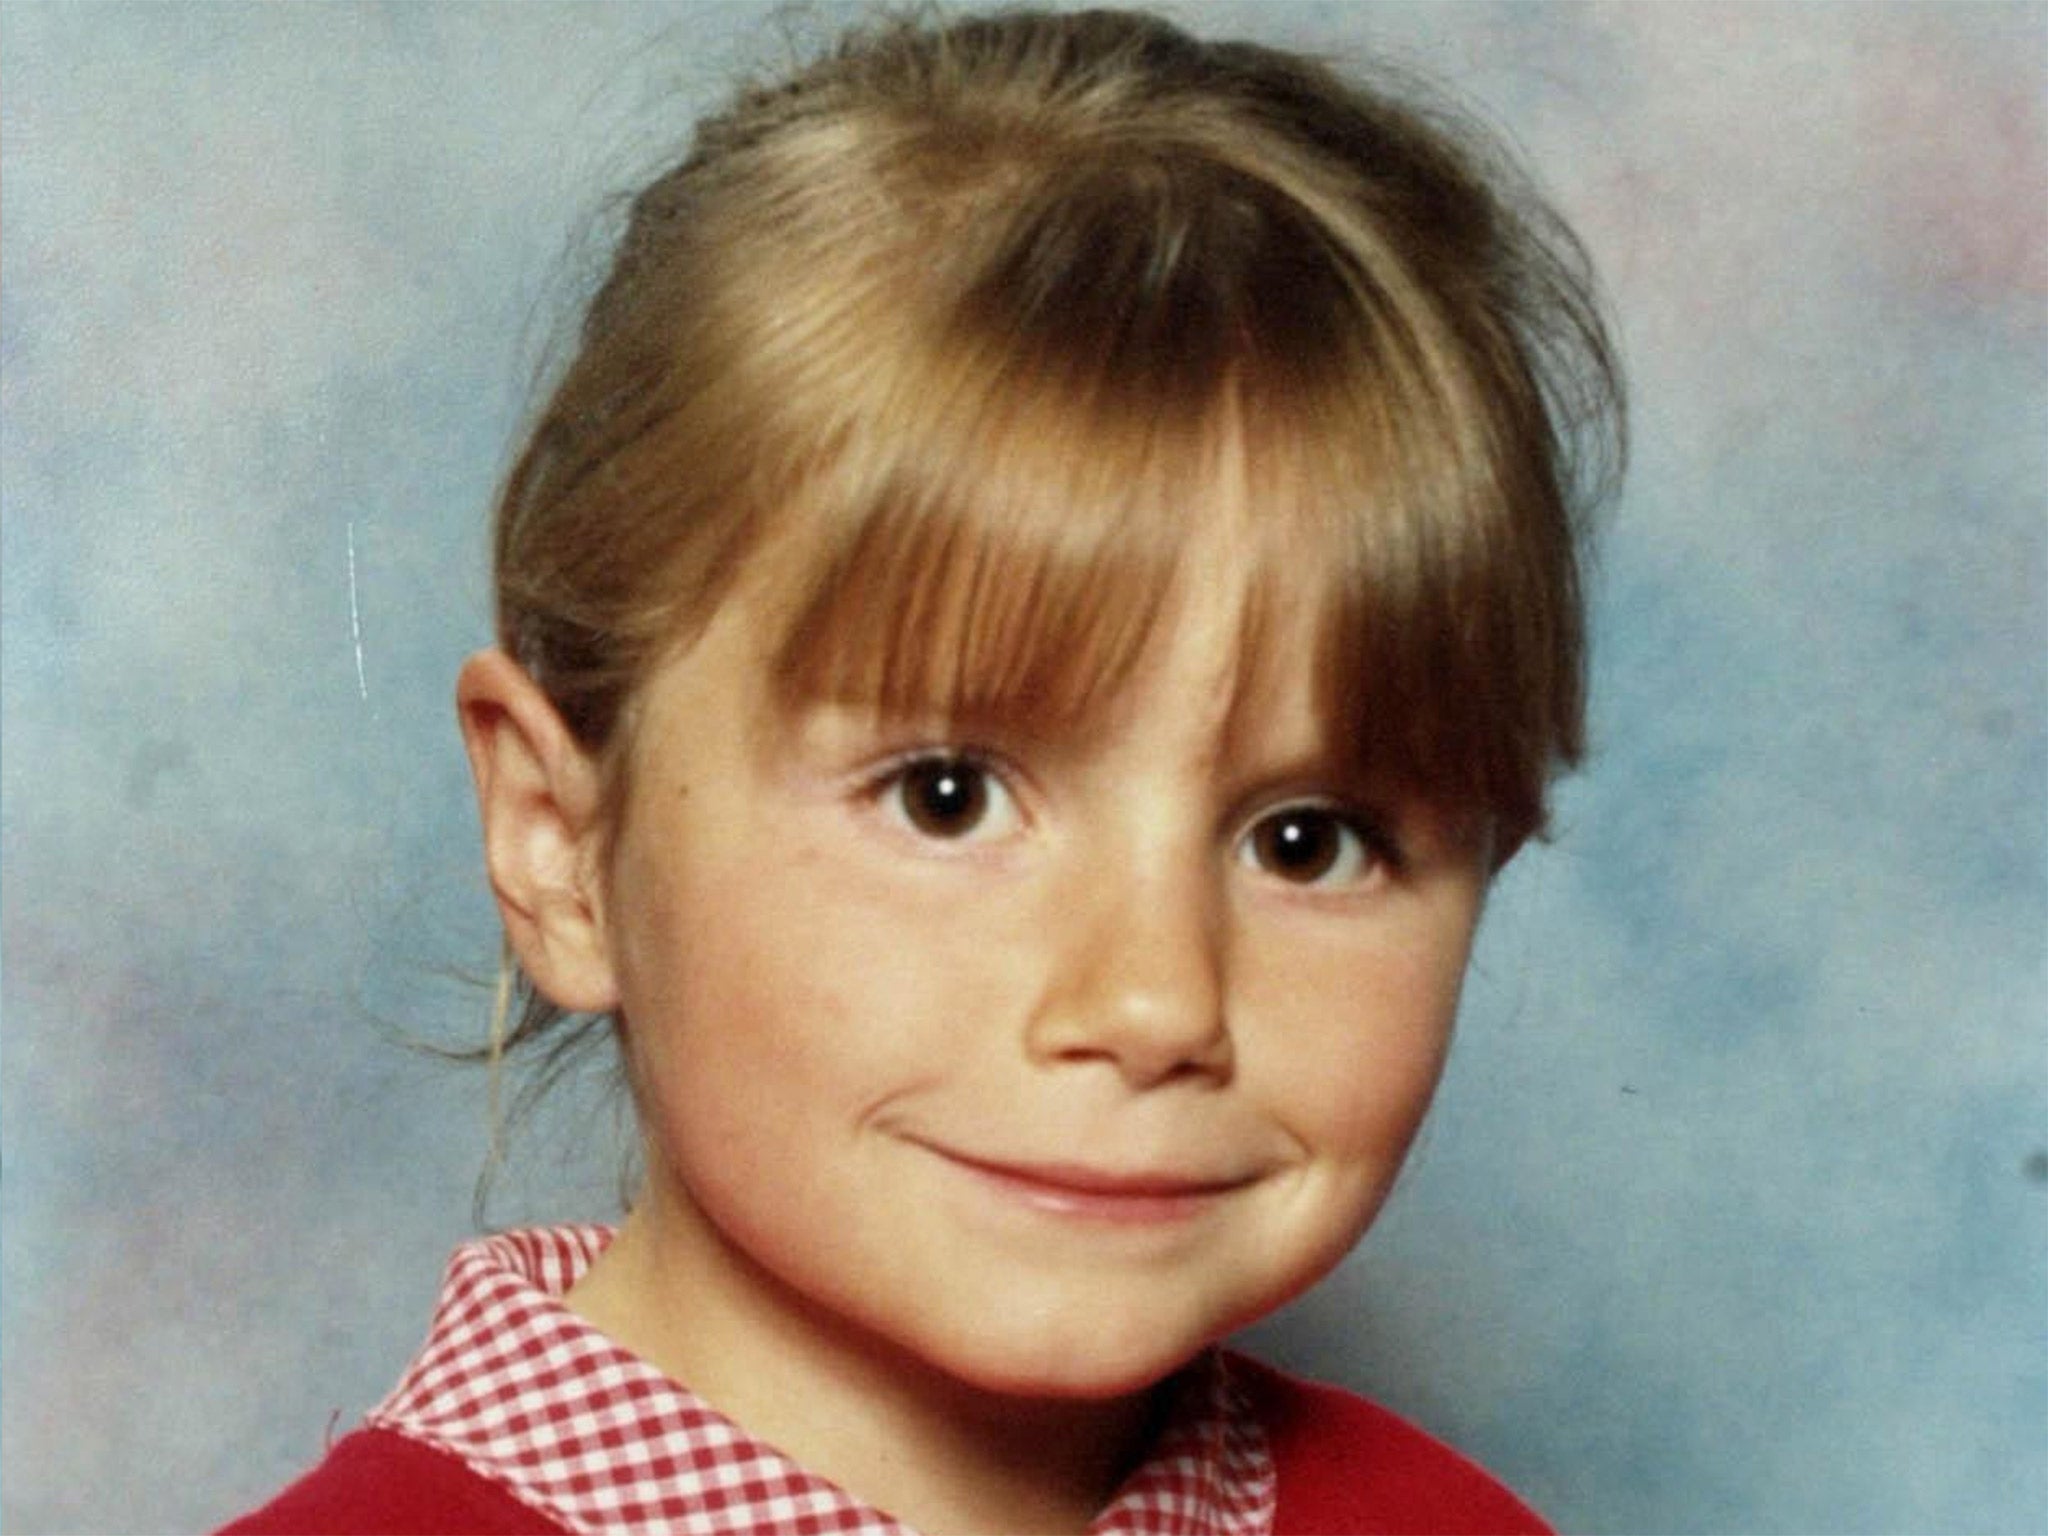 Sarah Payne was kidnapped and murdered in 2000